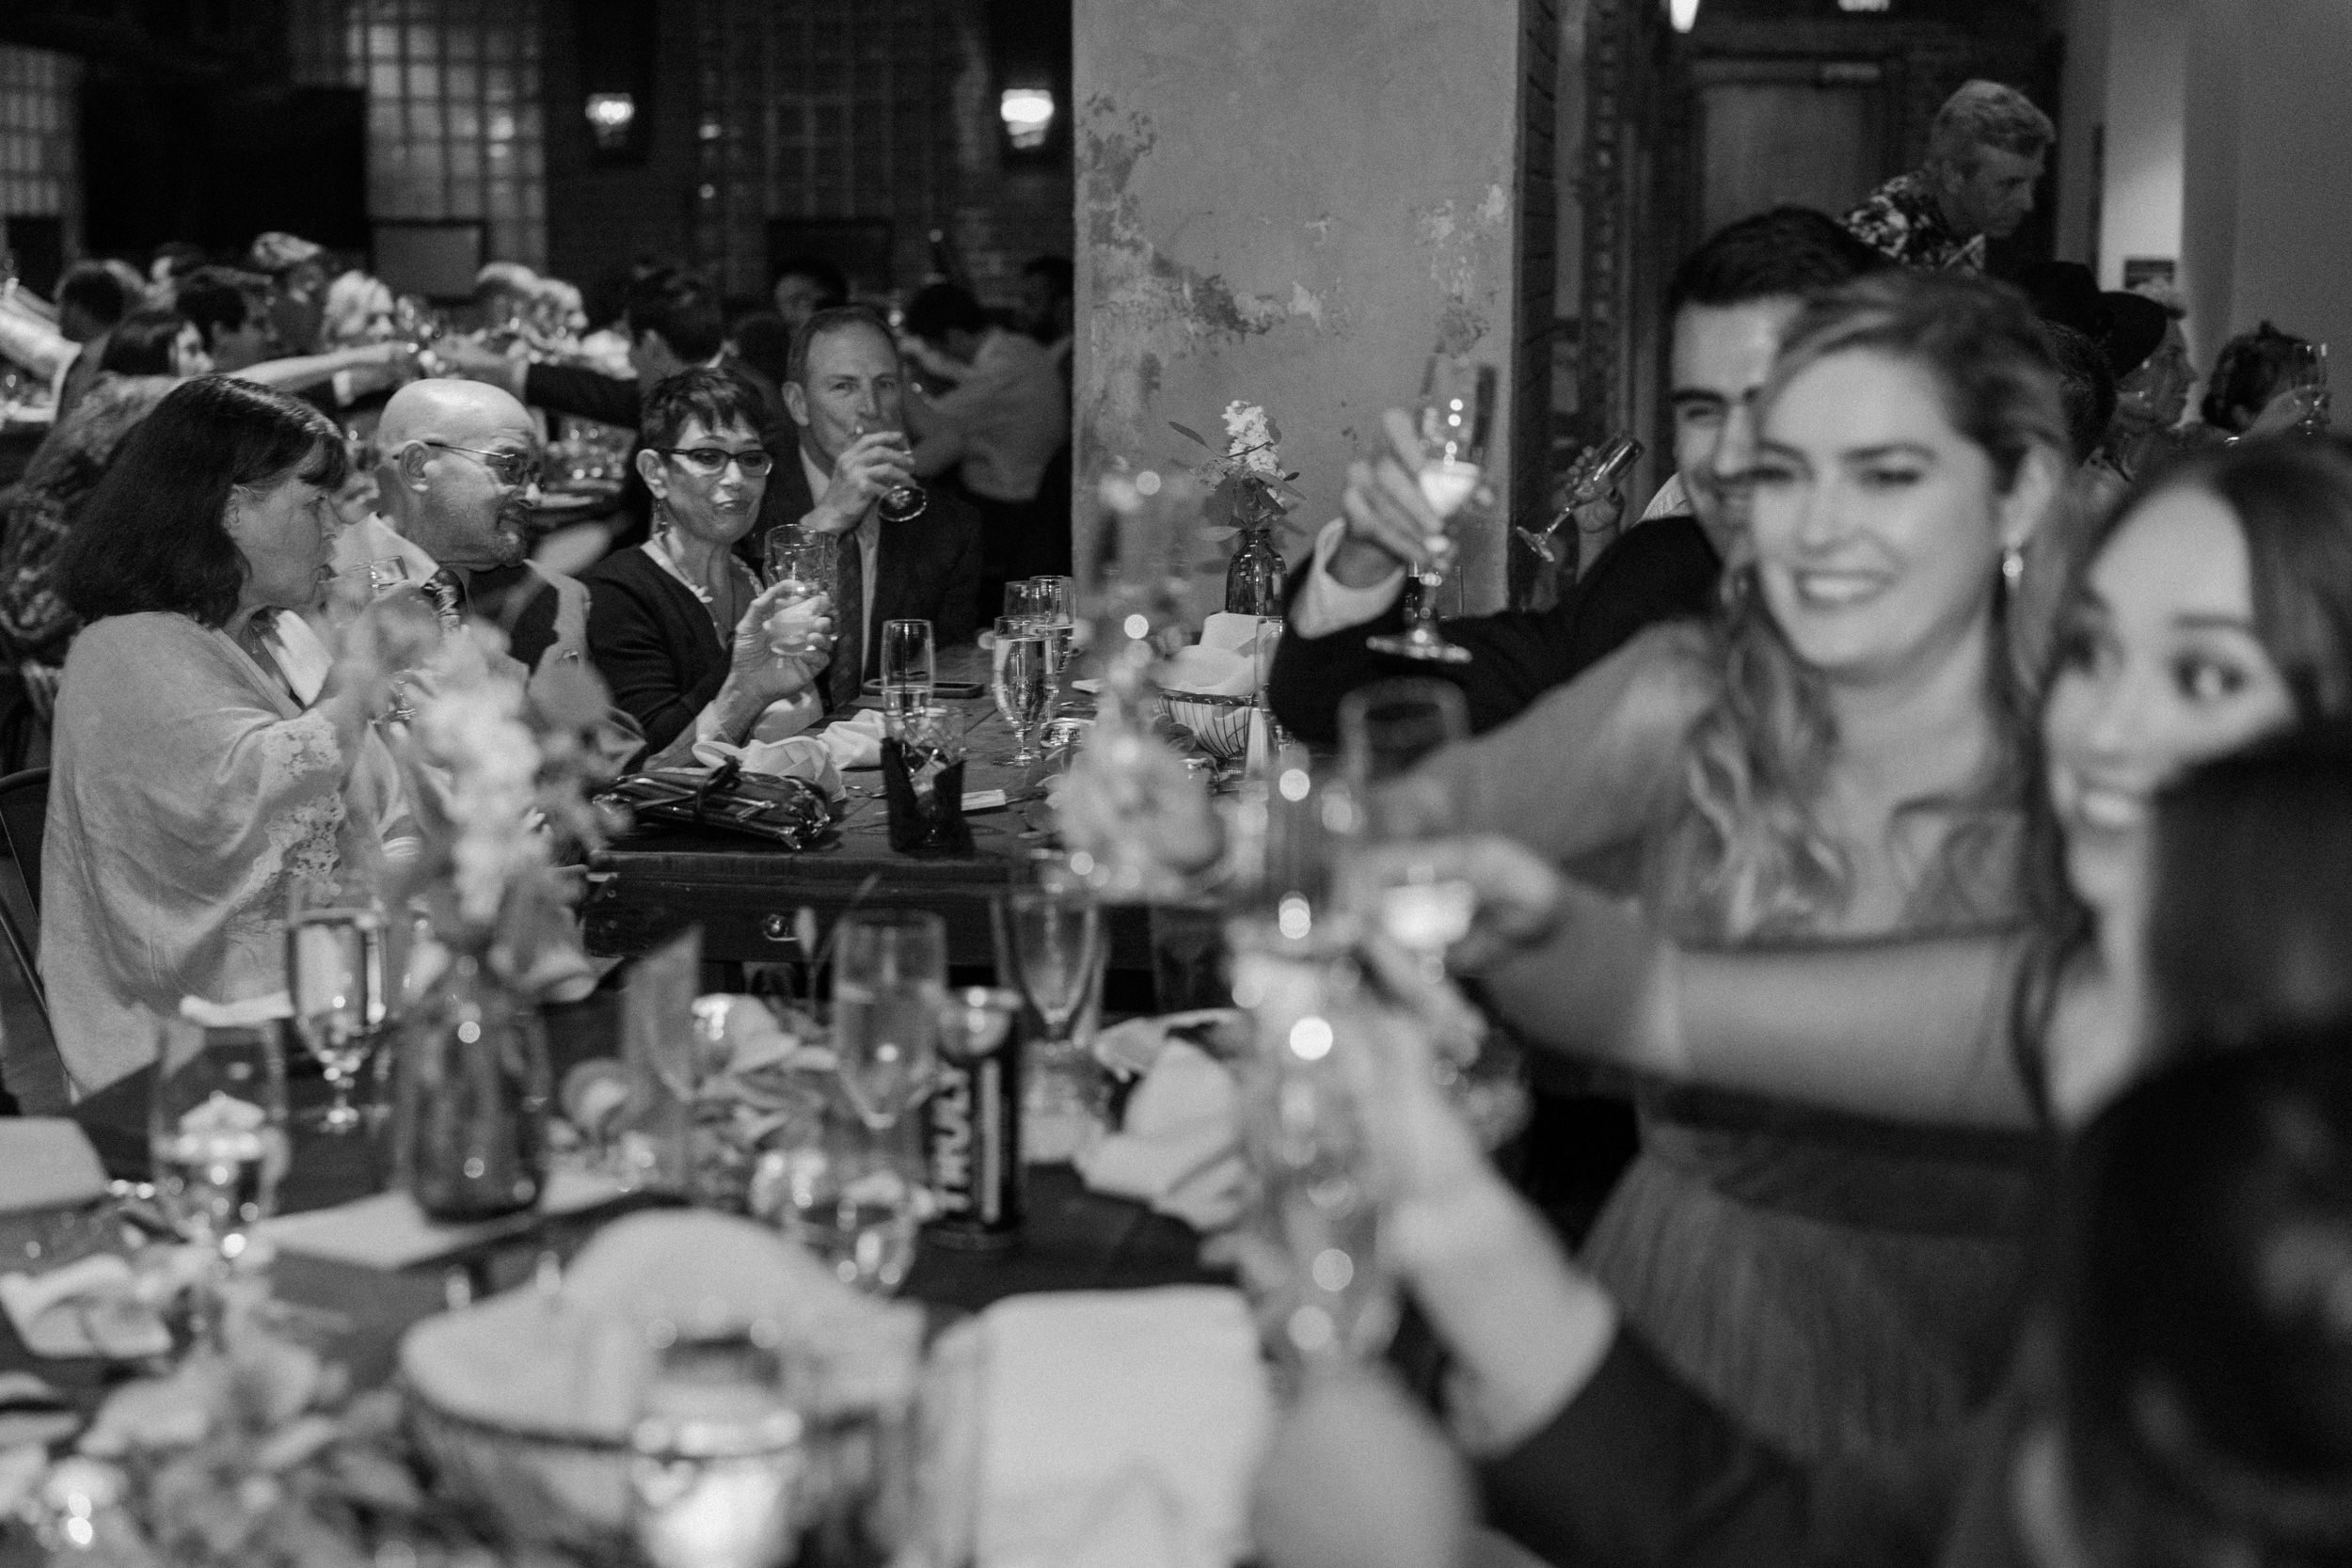 Wedding guests raise their glasses to toast